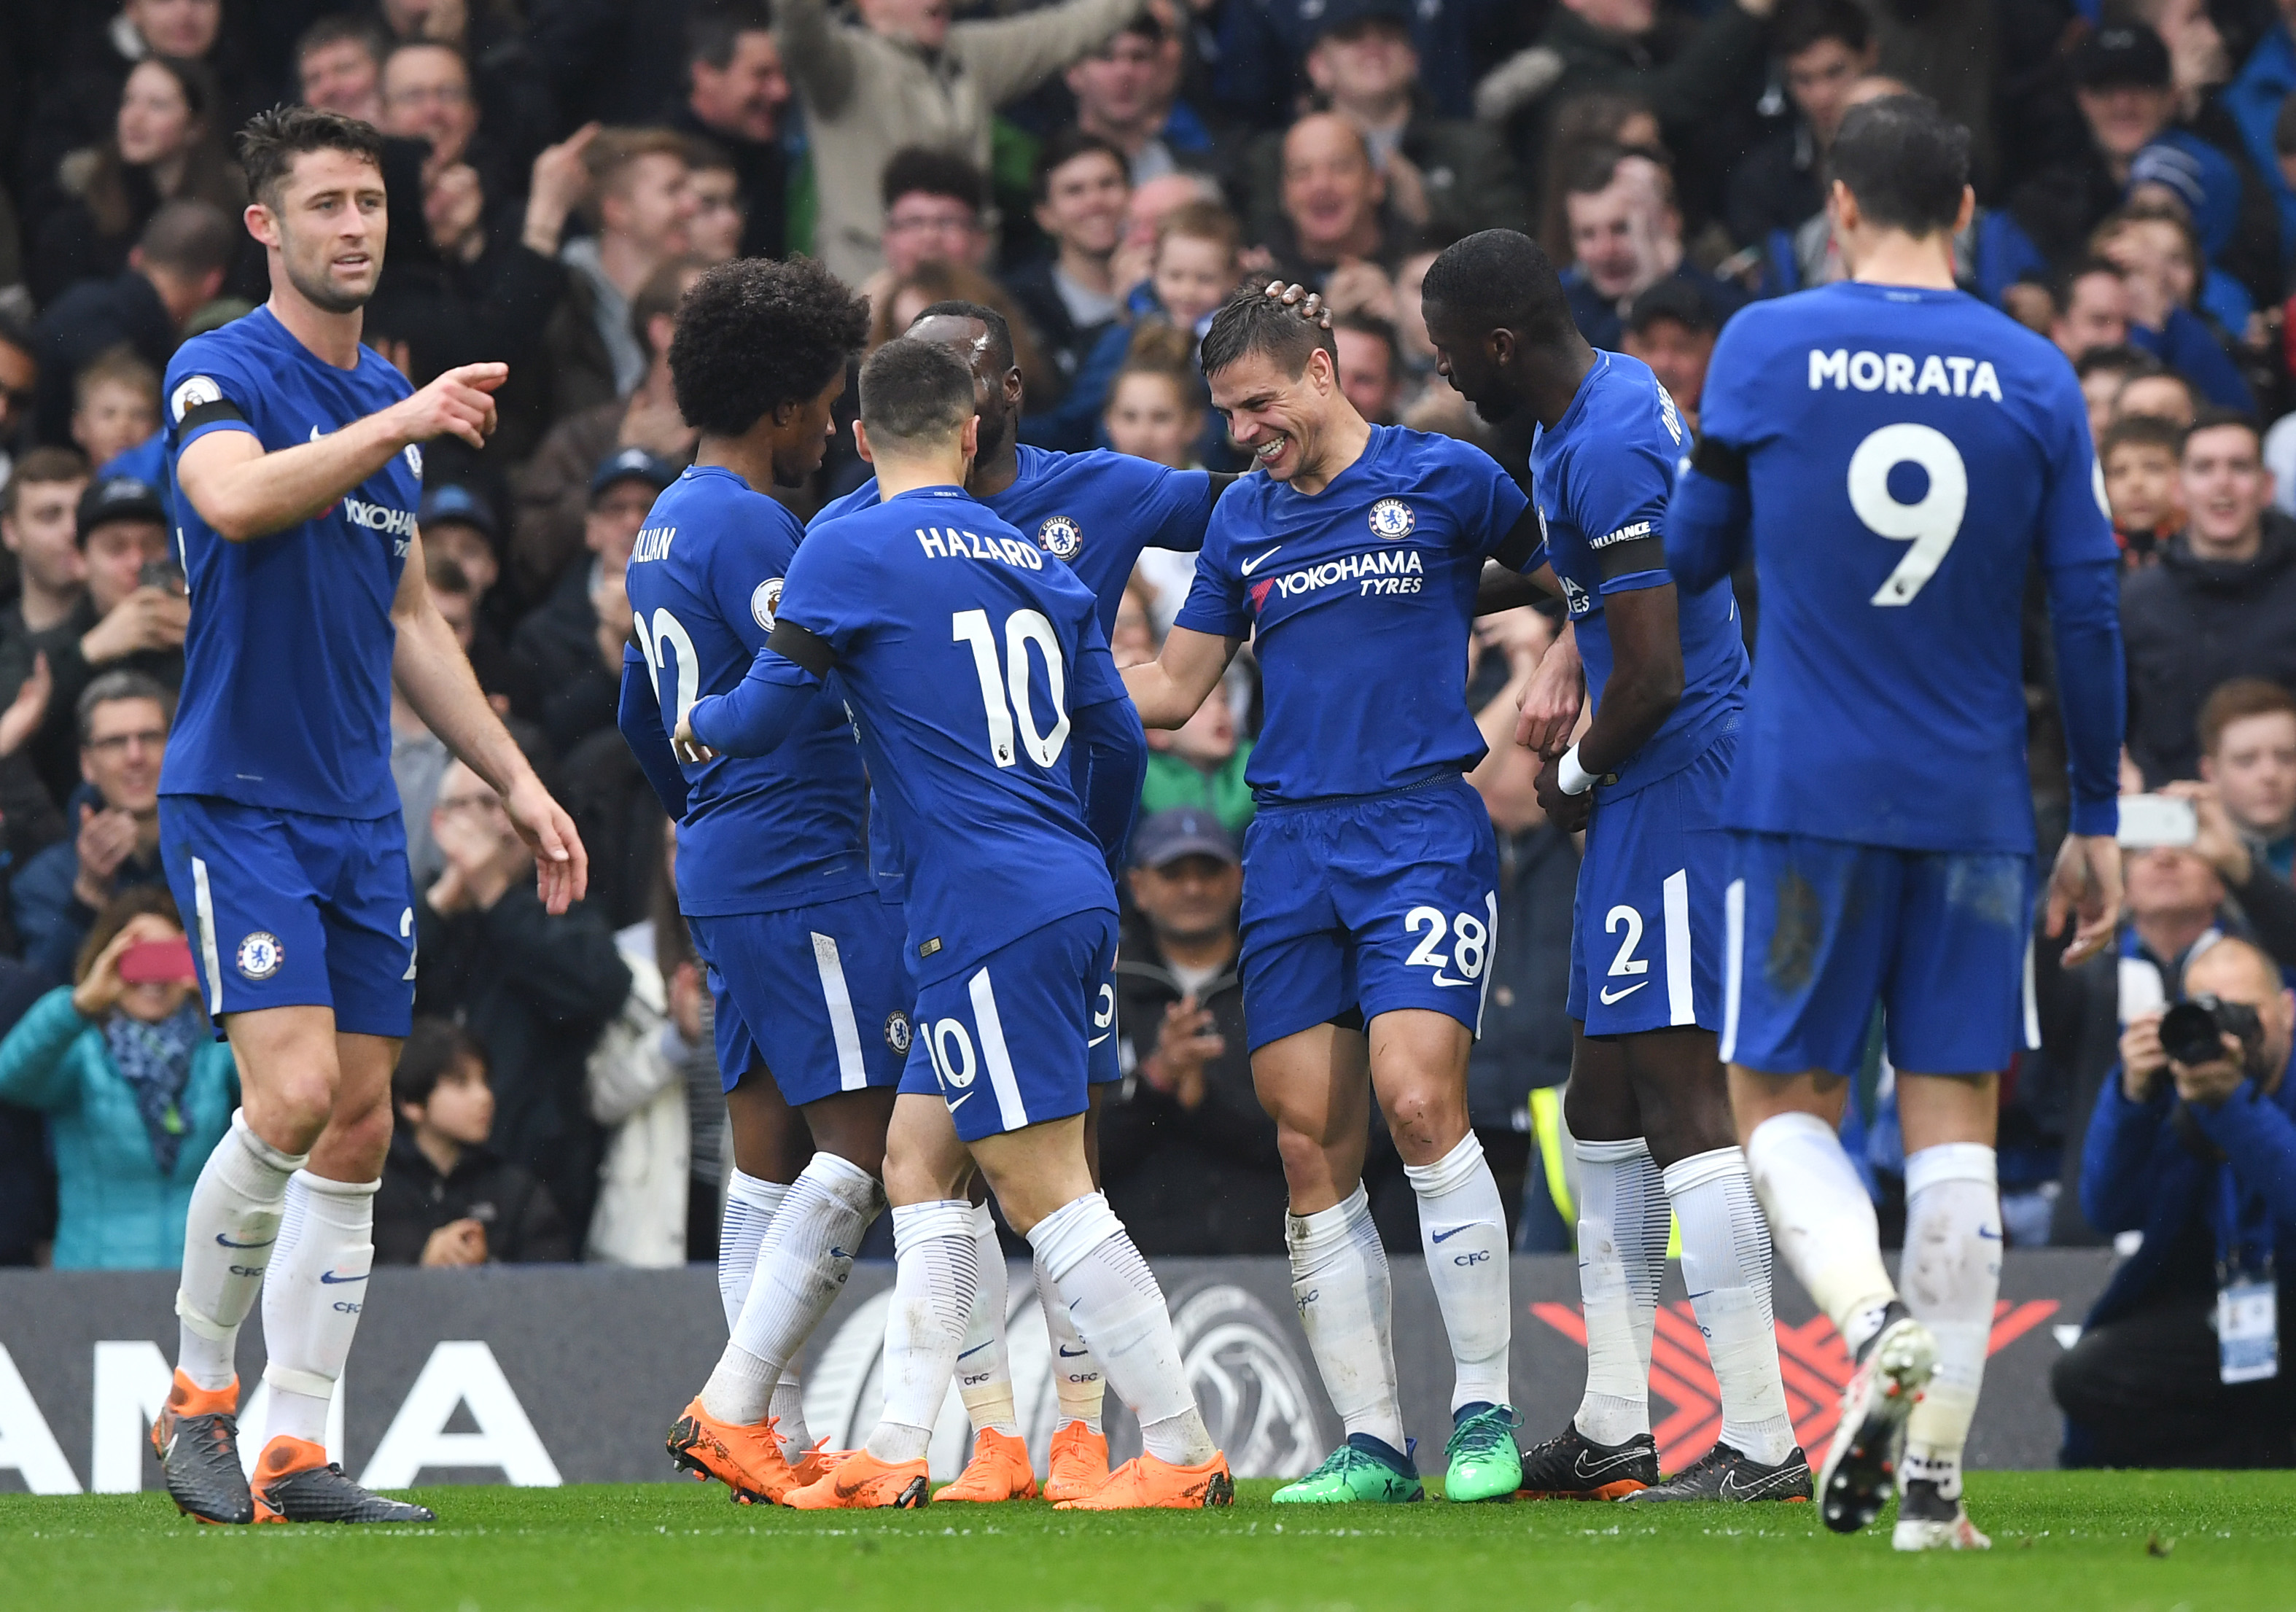 LONDON, ENGLAND - APRIL 08:  Cesar Azpilicueta of Chelsea celebrates with team mates after scores his sides first goal during the Premier League match between Chelsea and West Ham United at Stamford Bridge on April 8, 2018 in London, England.  (Photo by Shaun Botterill/Getty Images)